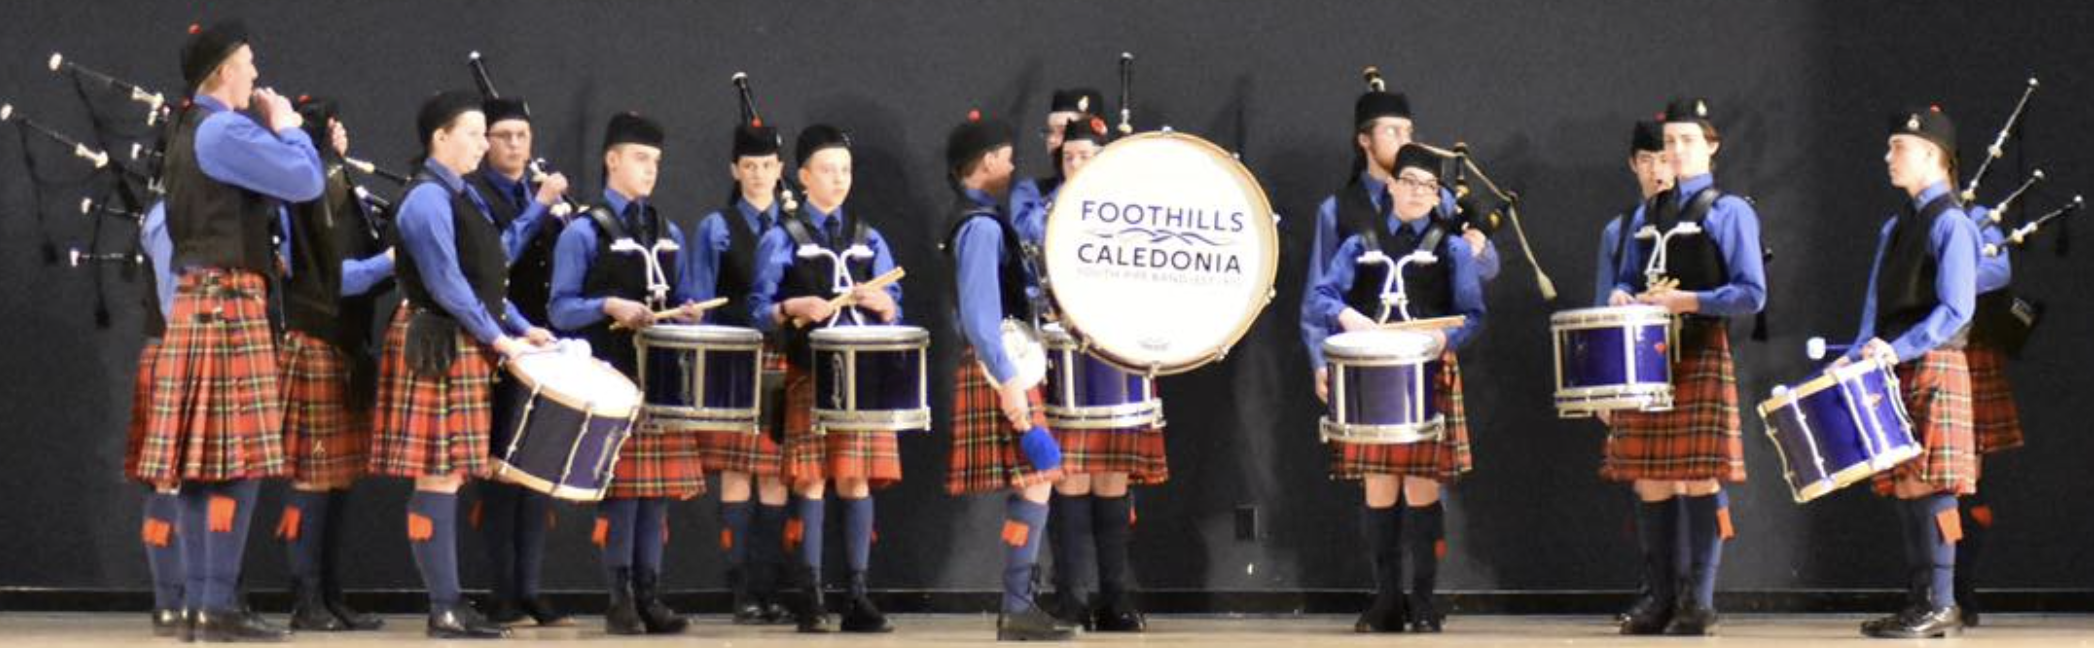 Foothills Caledonia Youth Pipe Band photo